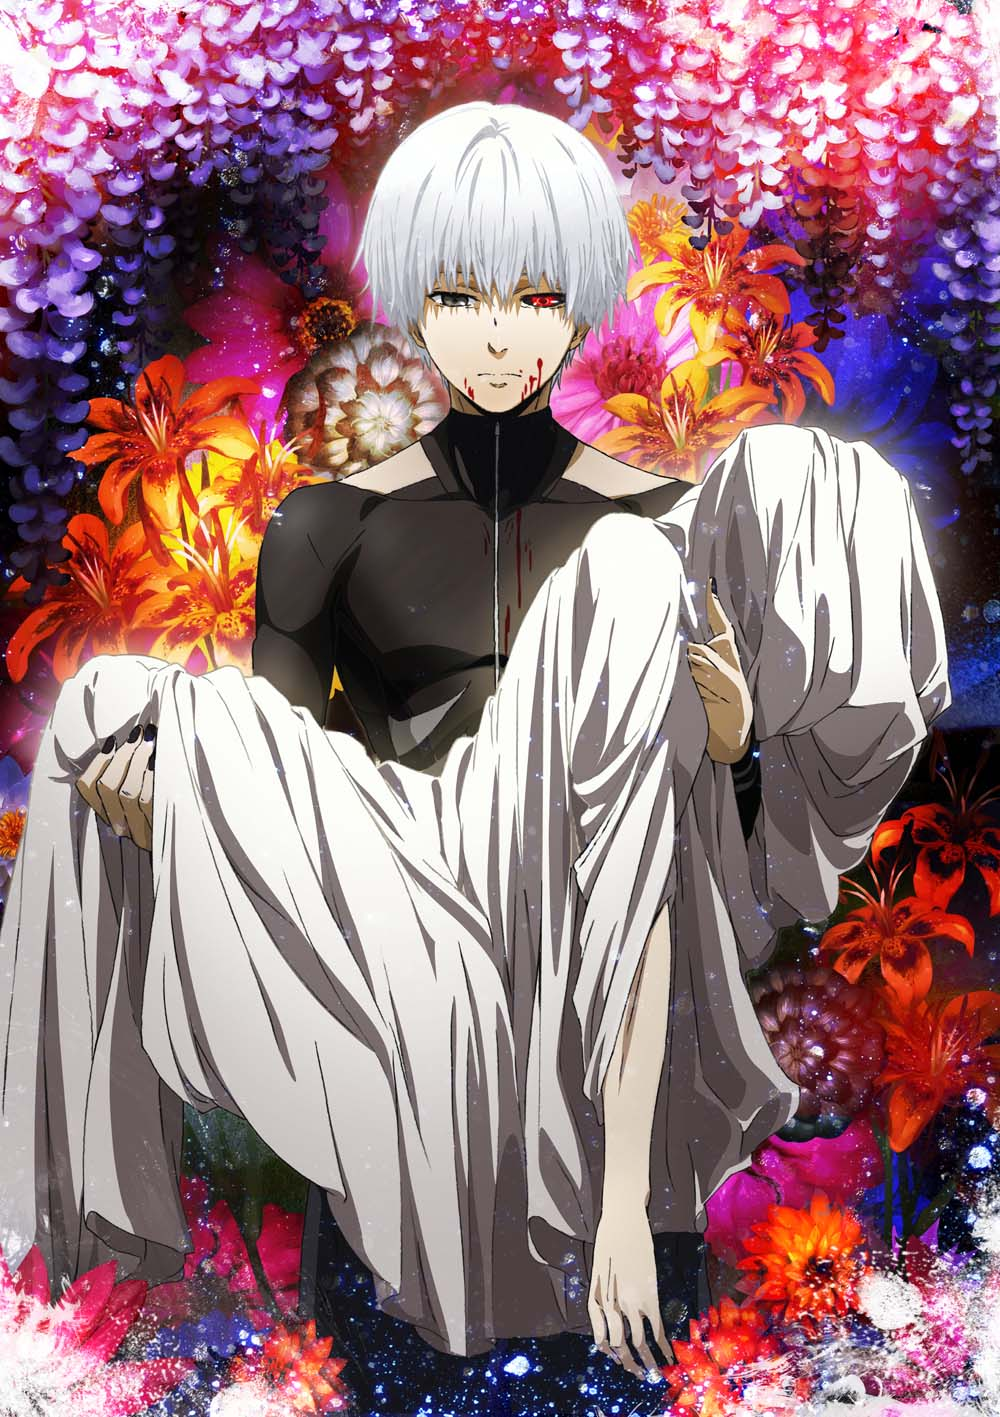 A Tokyo Ghoul Retrospective Remembering the Iconic Dark Fantasy Series